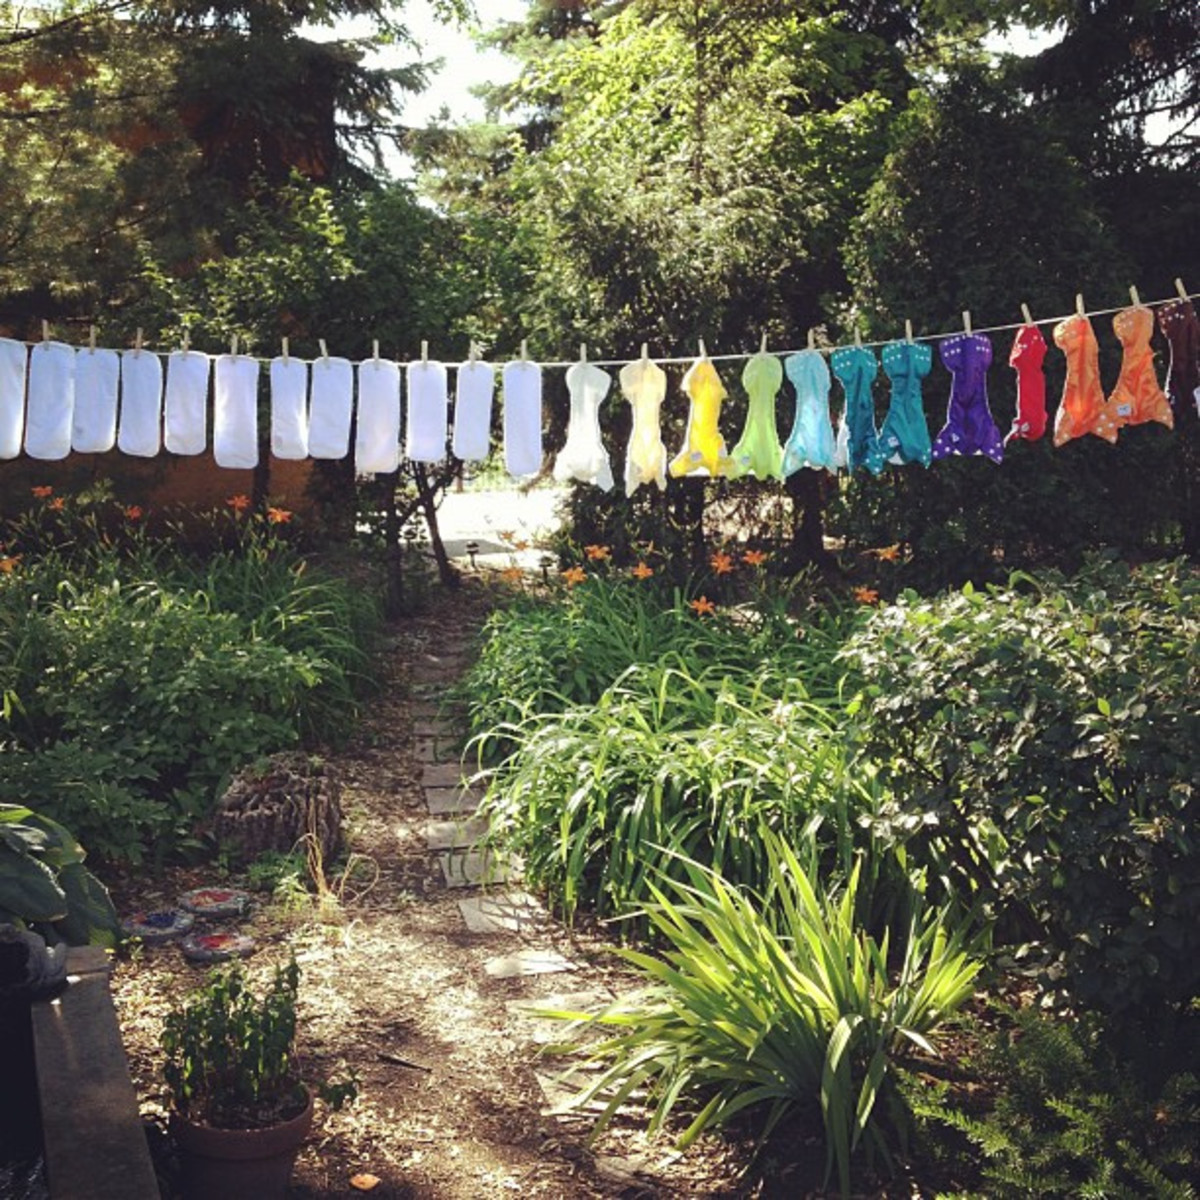 Line drying diapers in the sun also helps with stain removal.